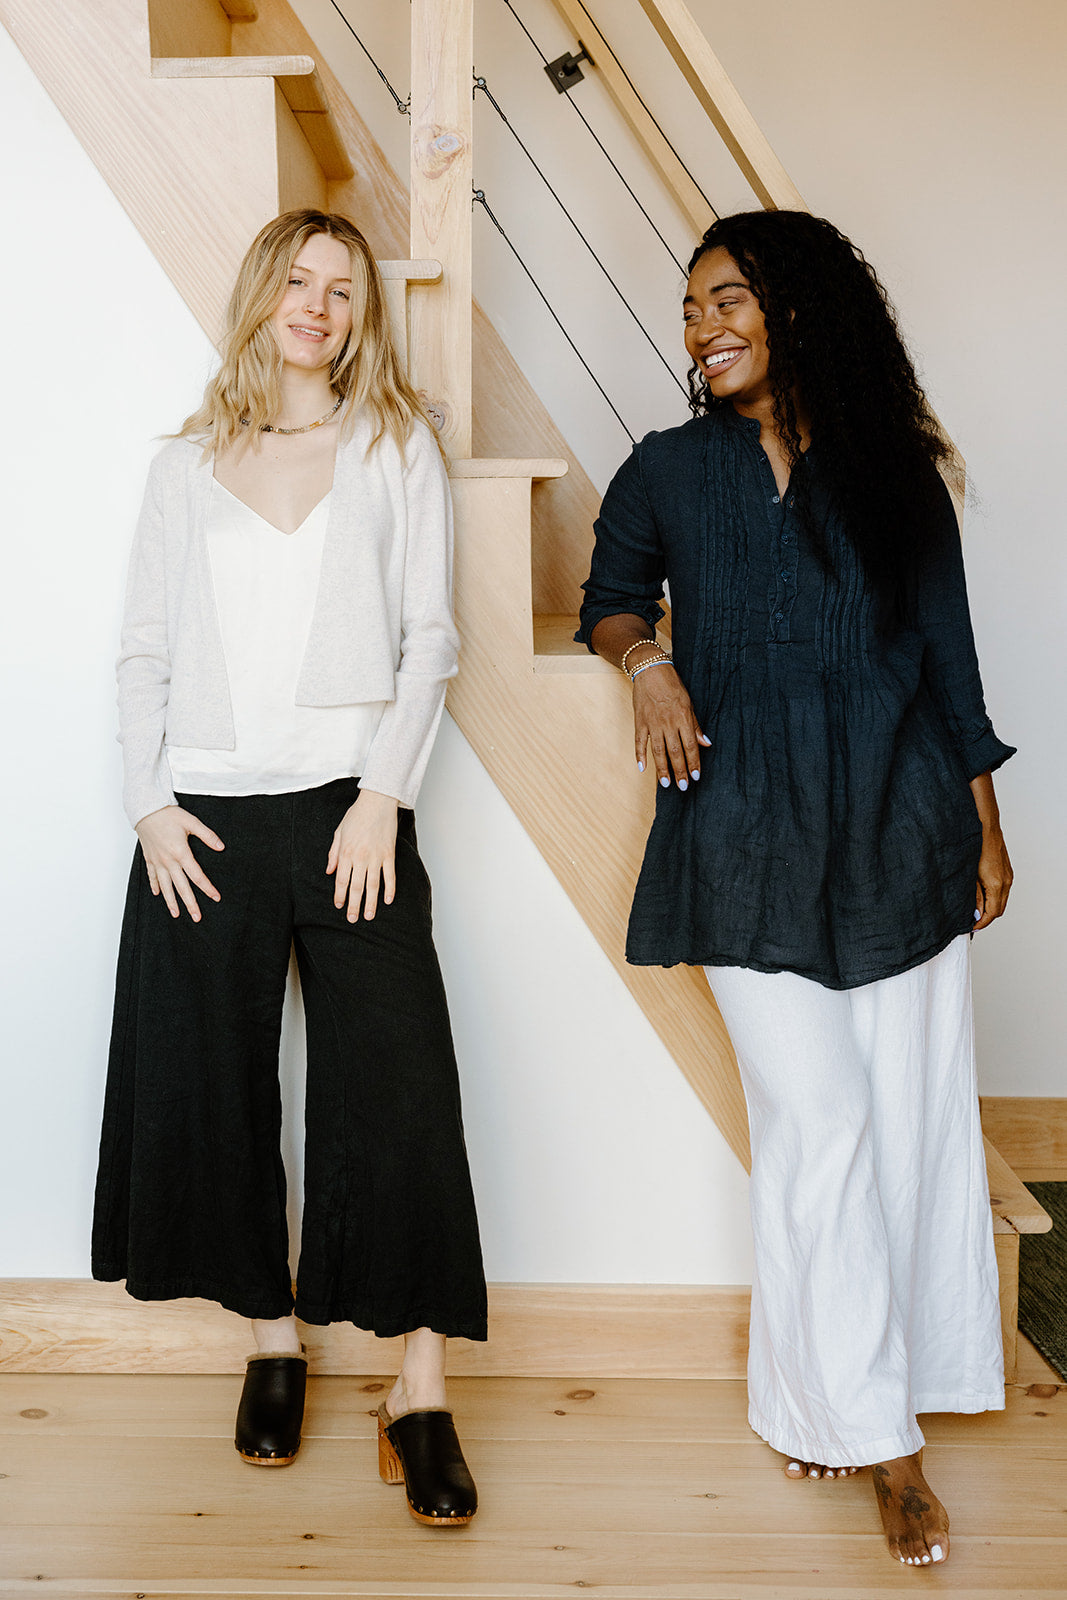 Two women smiling and standing on wooden stairs, one dressed in a light top with black pants, the other in a dark blue blouse with white pants.